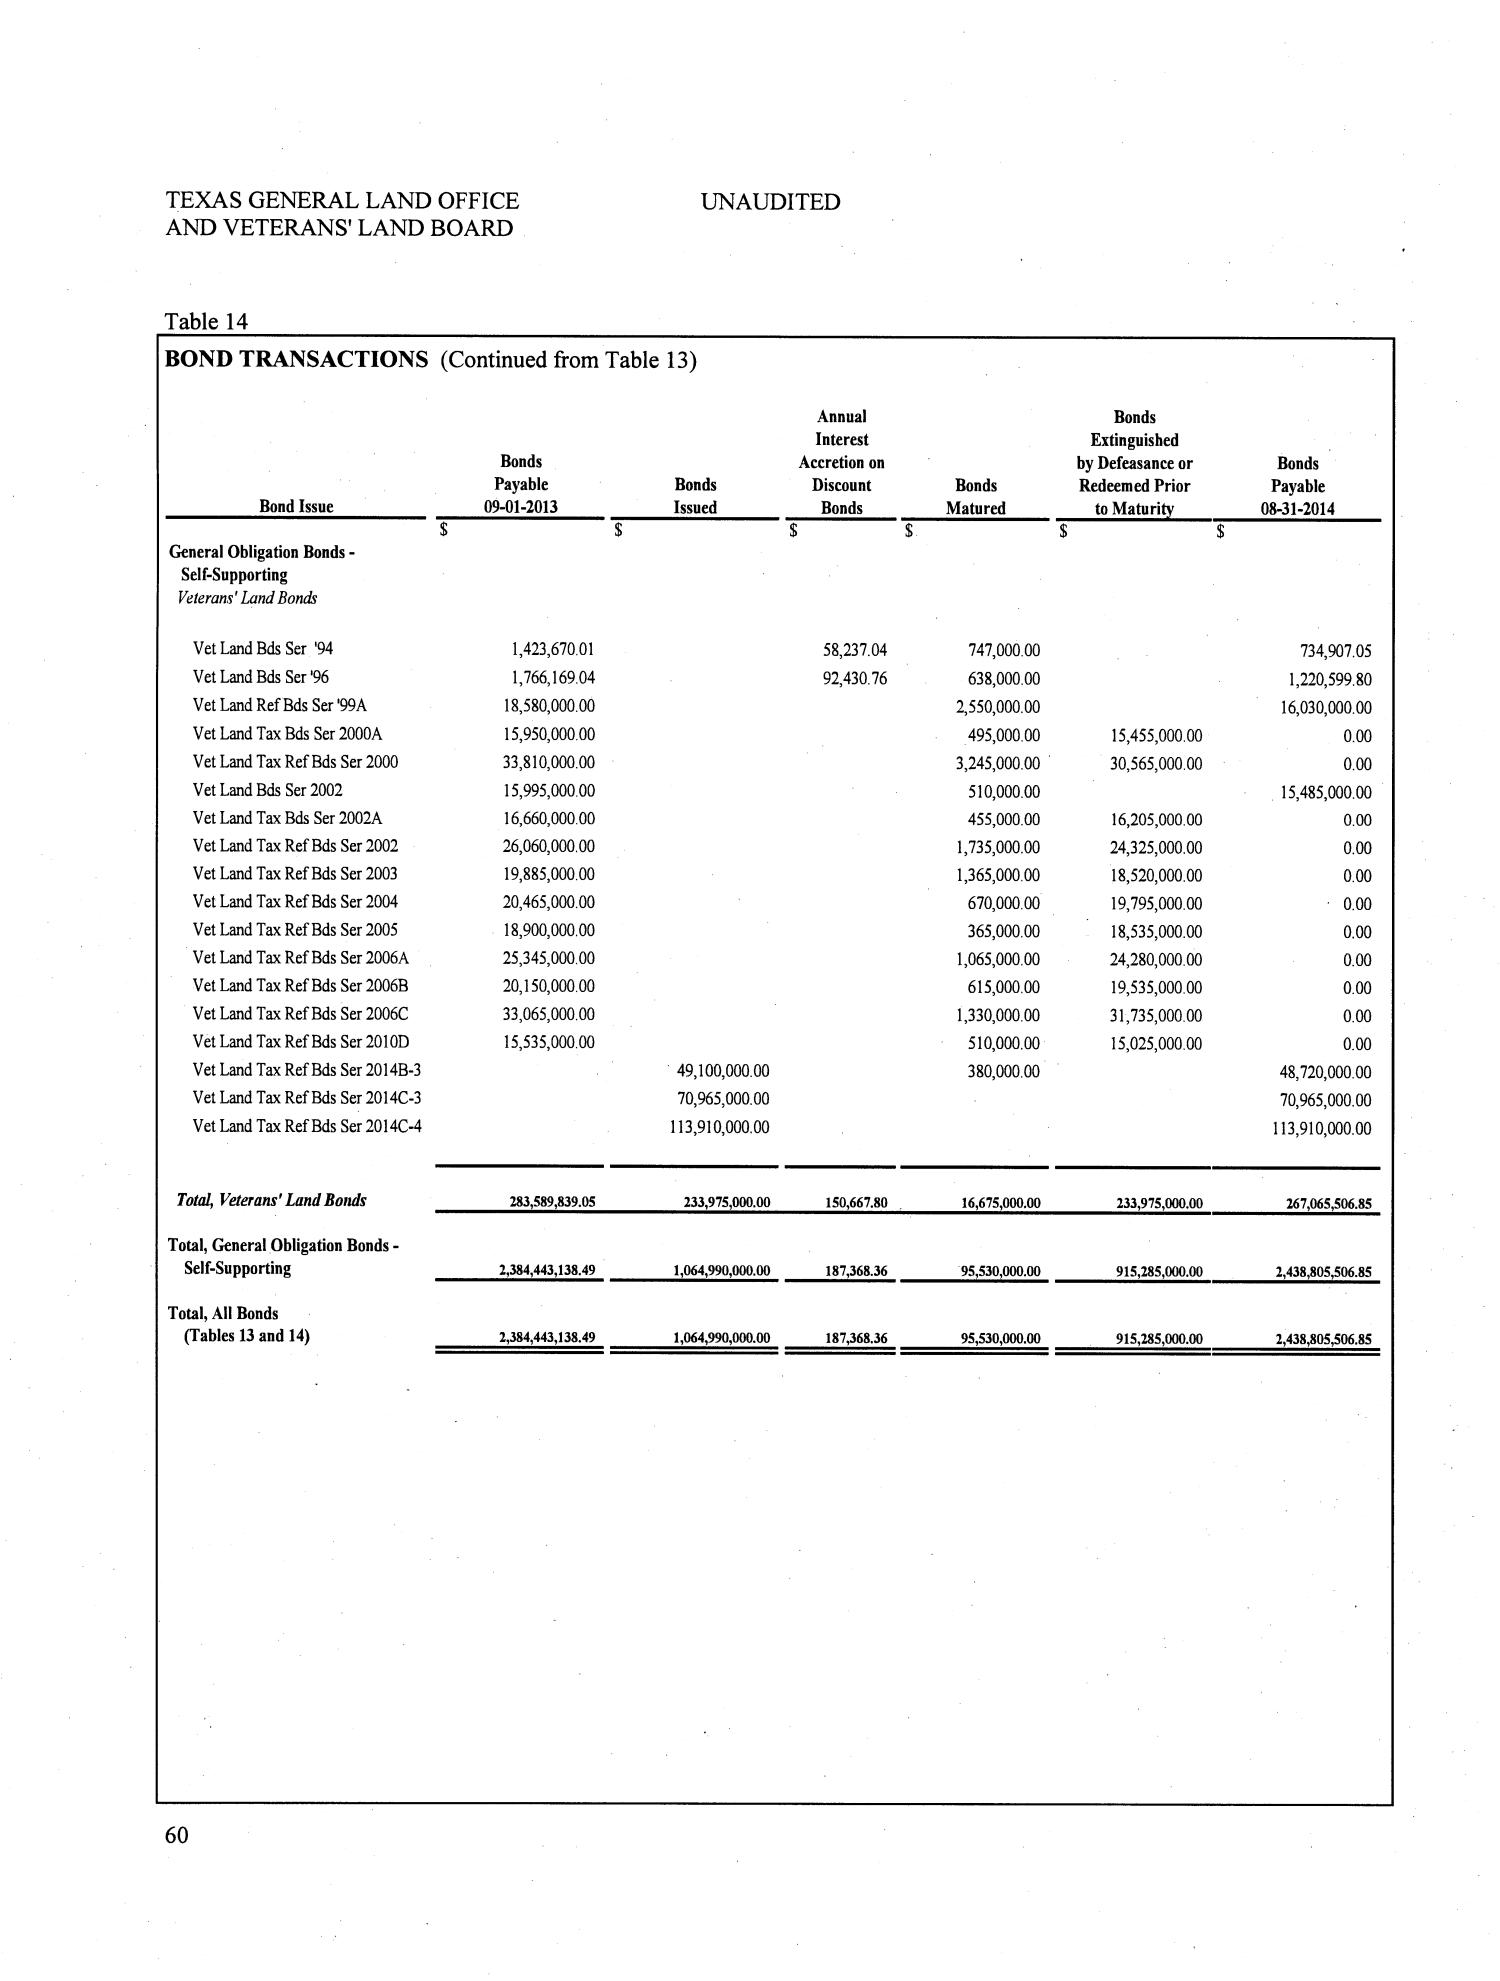 Texas General Land Office and Texas Veterans' Land Board Annual Financial Report: 2014
                                                
                                                    60
                                                